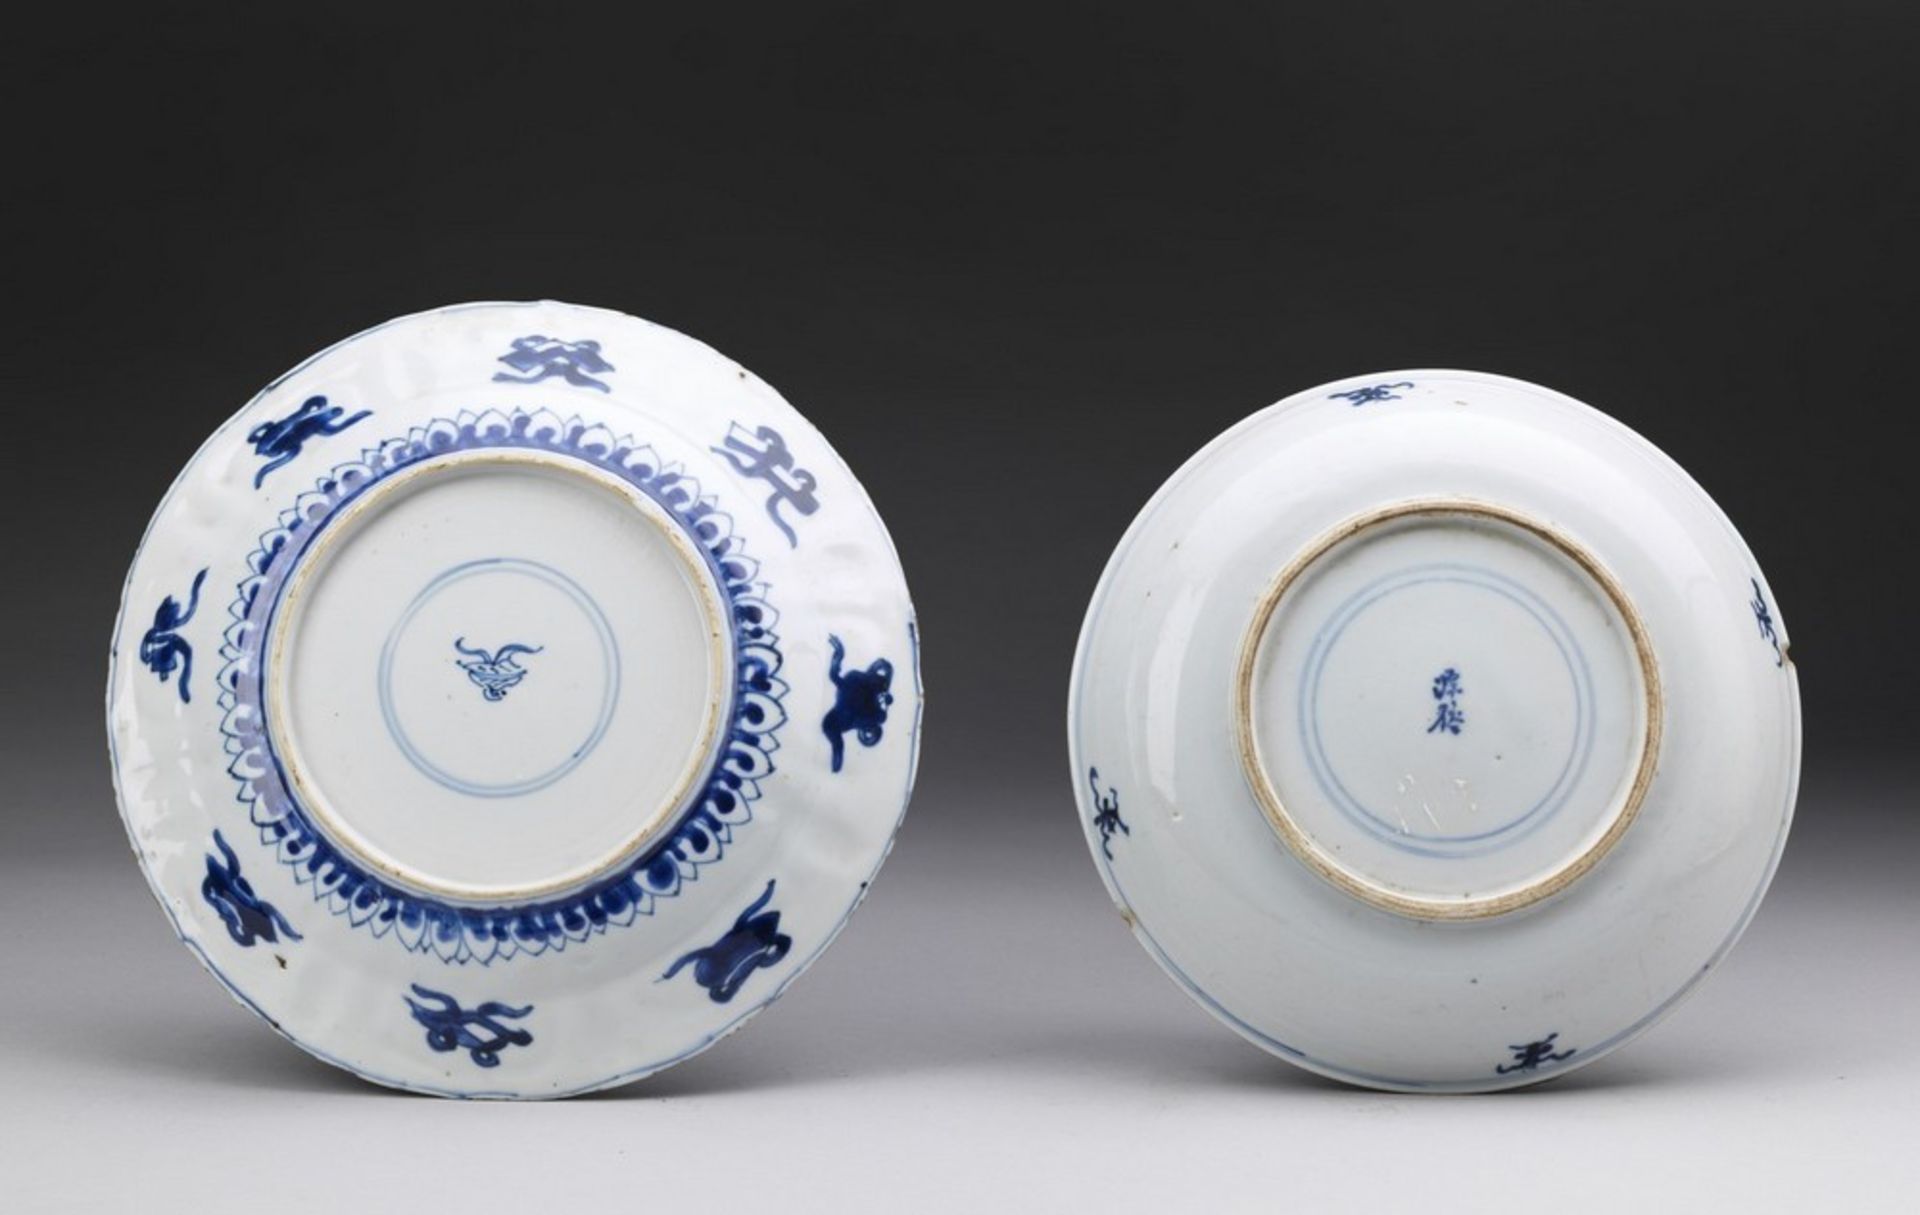 Arte Cinese Two blue and white porcelain dishes China, Qing dynasty, early 17th century . - Image 2 of 2